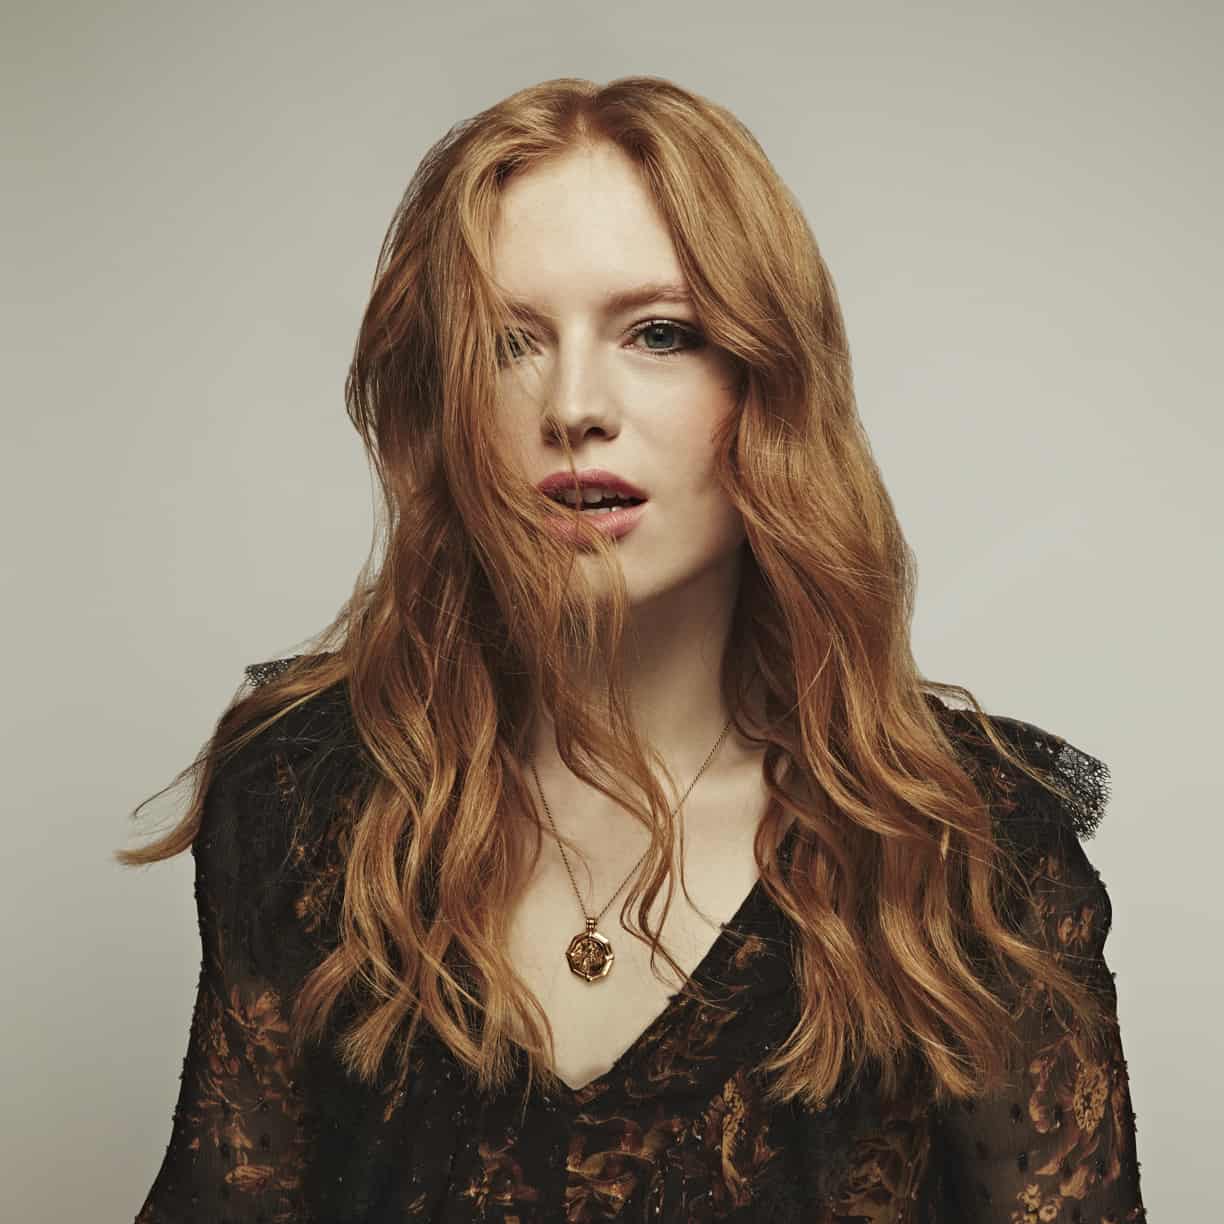 Breaking Through on Her Own Terms: An Interview with Freya Ridings ...